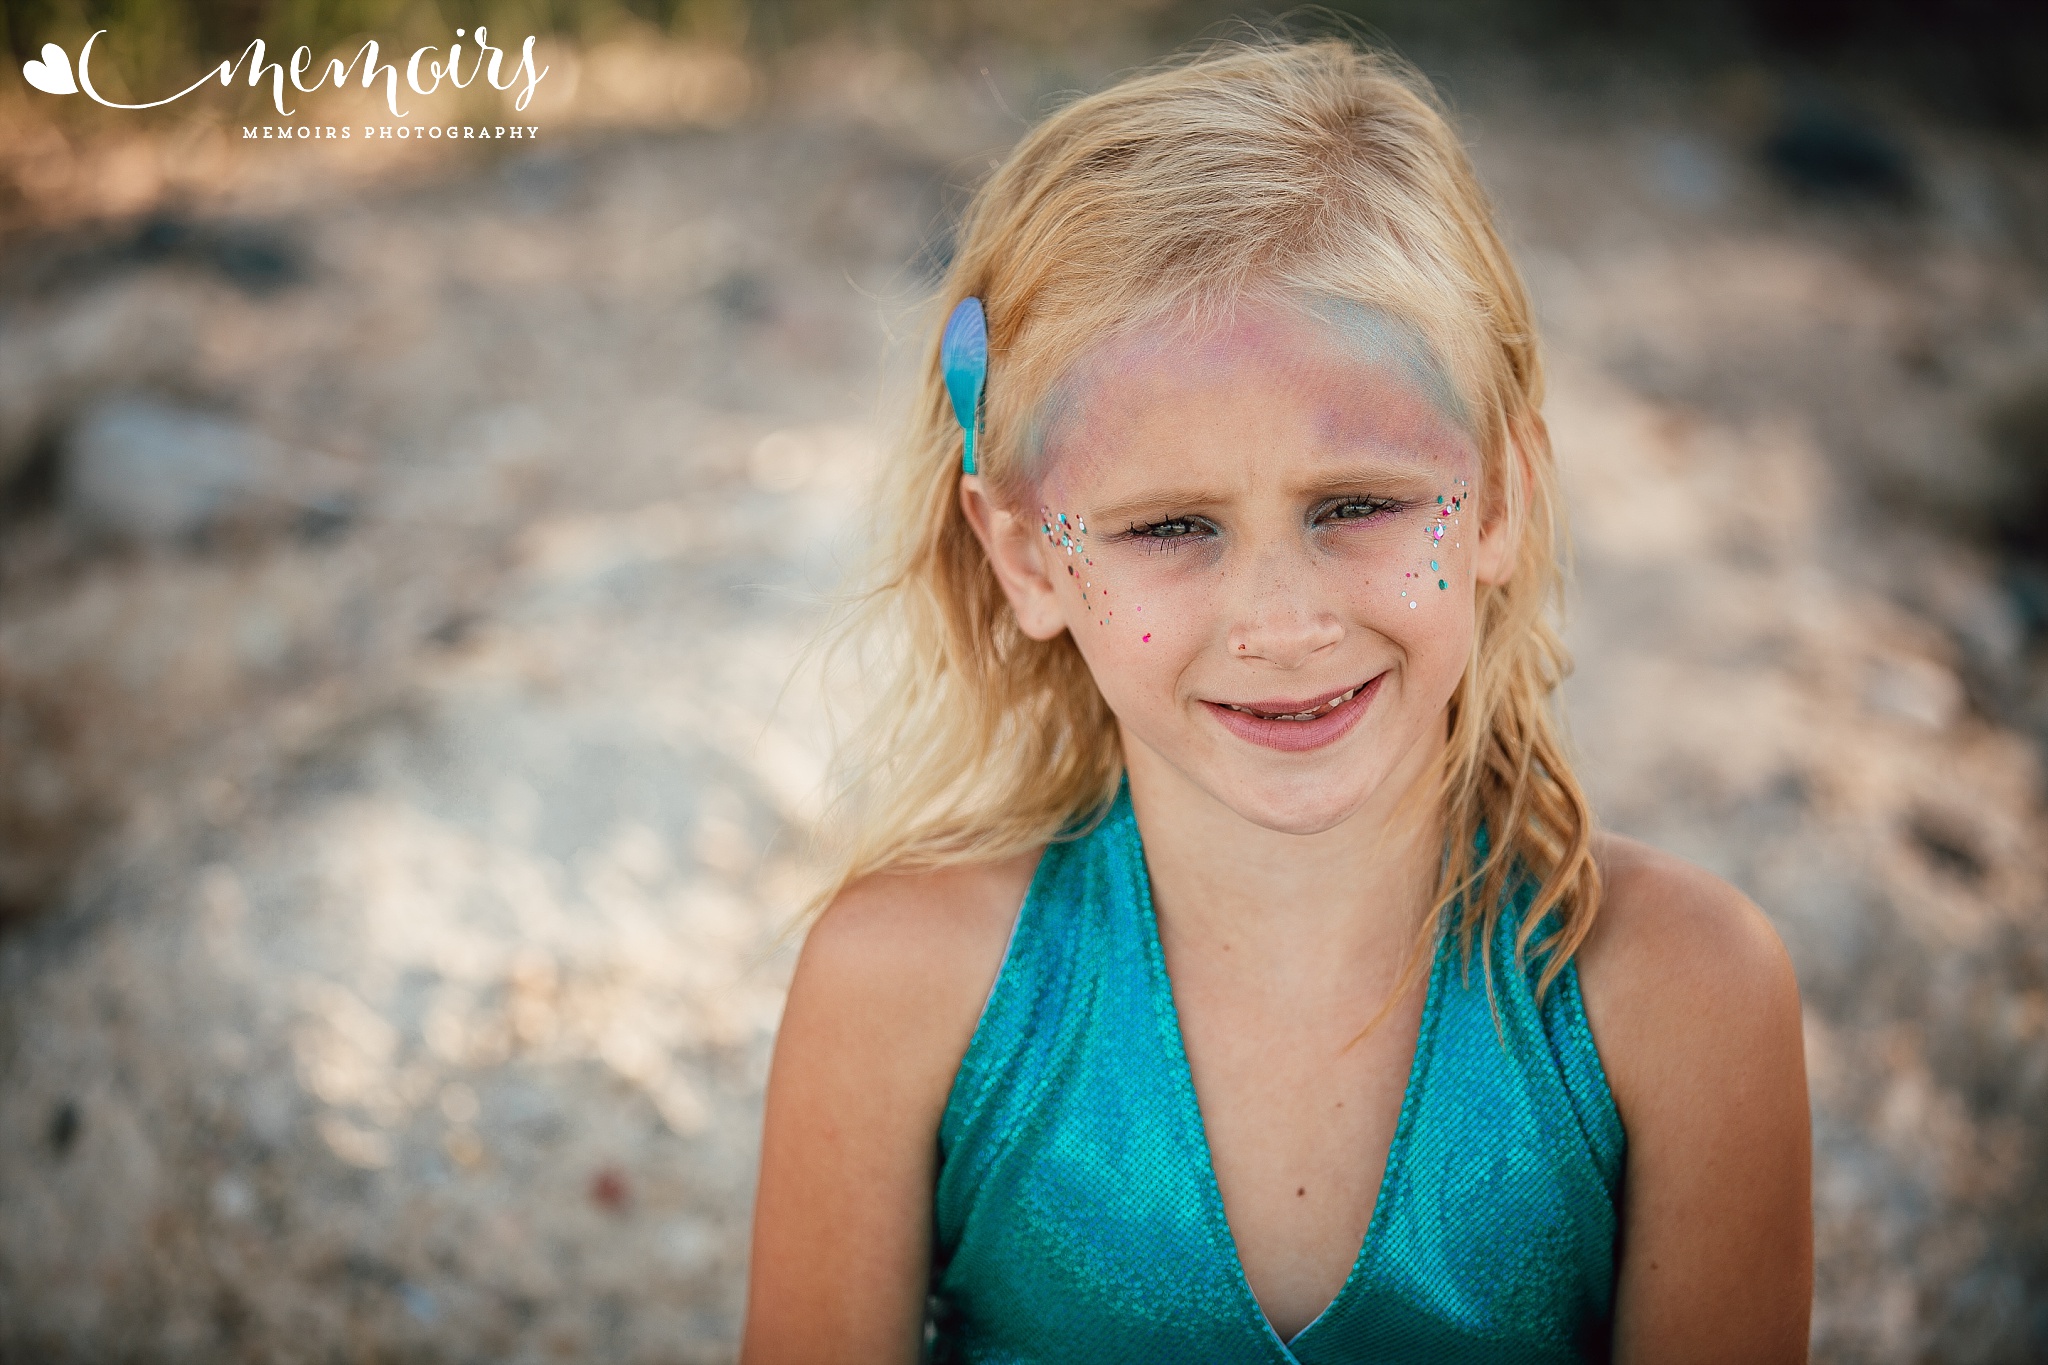 Lucy’s Port Huron Mermaid Photography Session